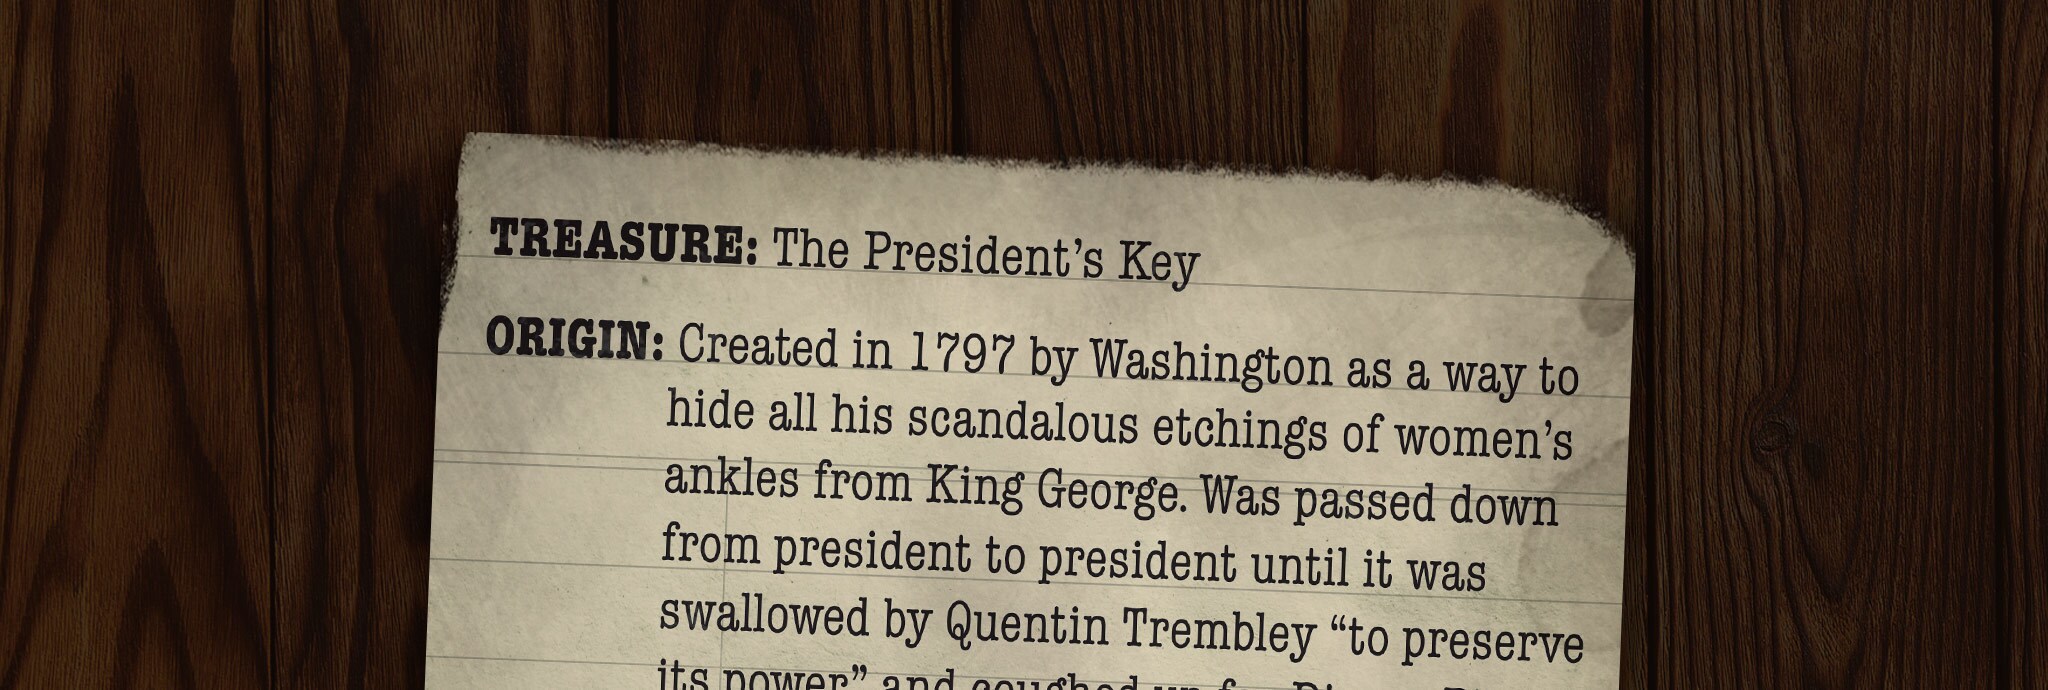 TREASURE: The President’s Key ORIGIN: Created in 1797 by Washington as a way to hide all his scandalous etchings of women’s ankles from King George. Was passed down from president to president until it was swallowed by Quentin Trembley “to preserve its power” and coughed up for Dipper Pines 150 years later. TASTES LIKE: Licking a grandpa CAN UNLOCK: The Washington Monument, which is actually a giant music box and spins and plays “Yankee Doodle” when you crank it. The Lincoln Memorial, under which are hidden the bones of Linclops, the hundred-foot cyclops with a saddle on it that Abe Lincoln rode into battle during the Civil War. The President’s Cabinet, a chest buried under the White House containing the never-before-seen “Final Draft of the Constitution,” which contains the Kevinth Amendment (granting special rights to anyone named Kevin) and instates a prohibition on sideburns.